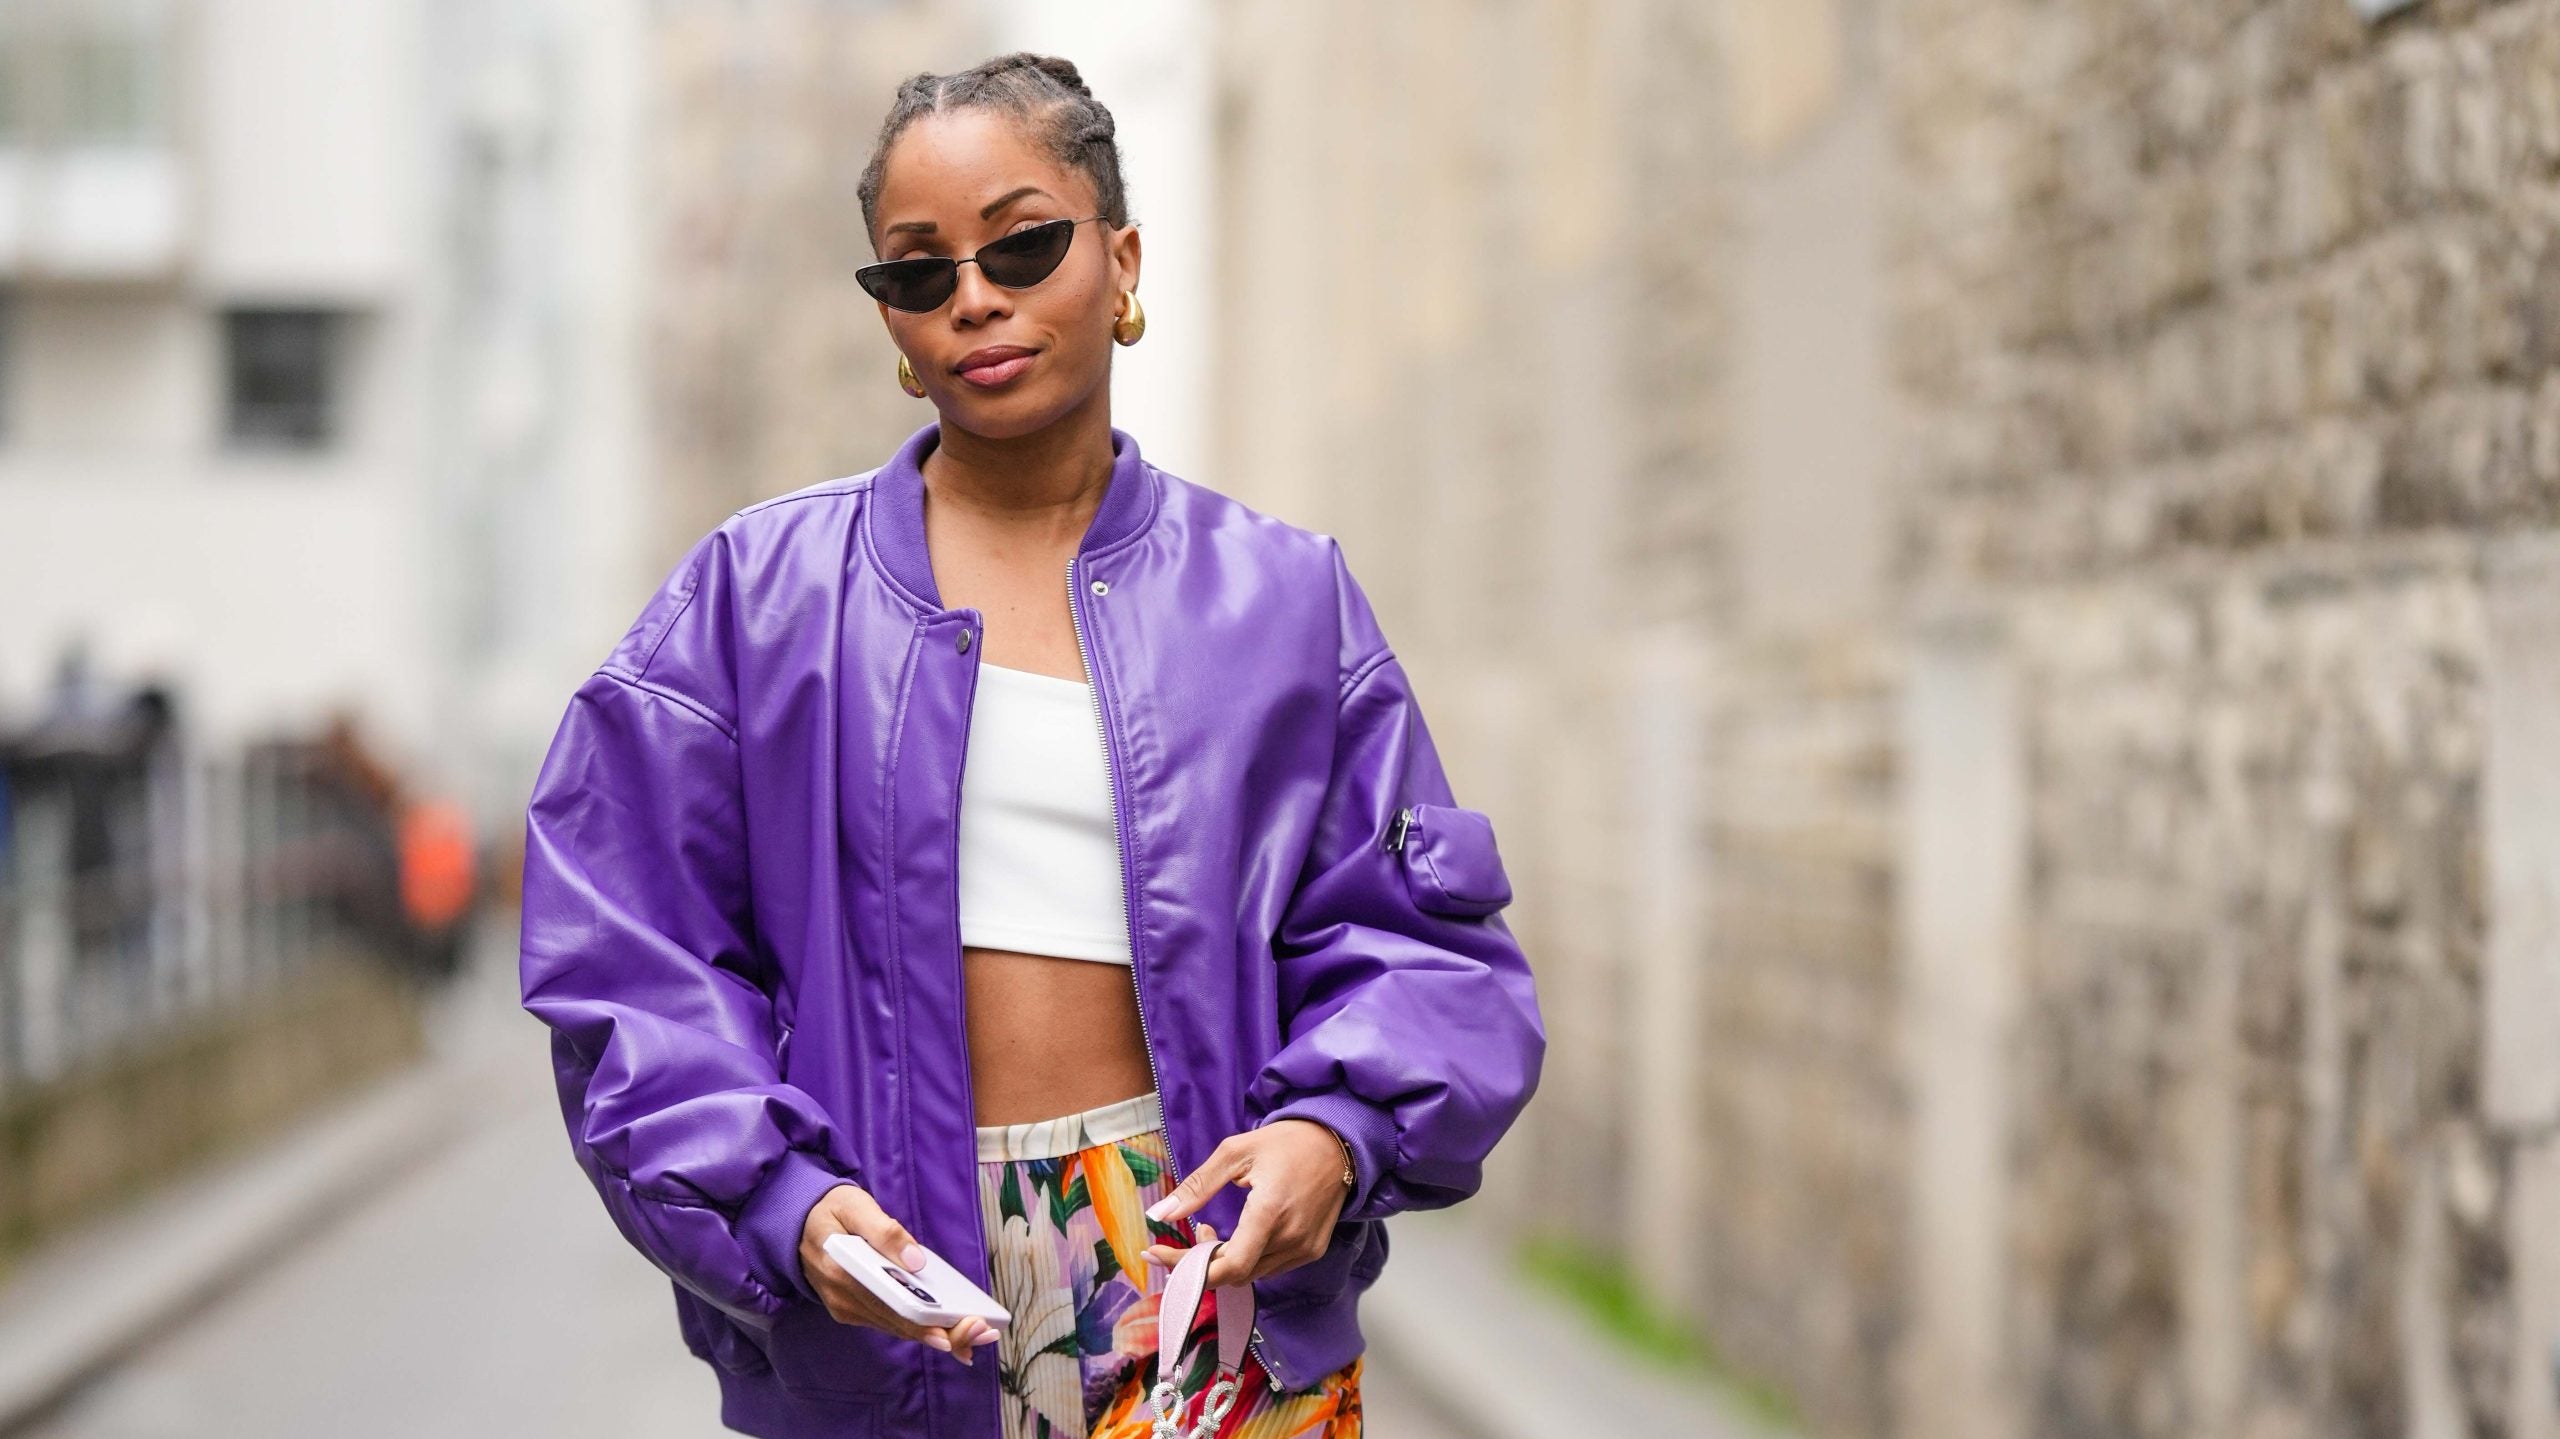 Bomber Jackets Are The Best Fall Jacket—Shop These 7 To Stay Warm